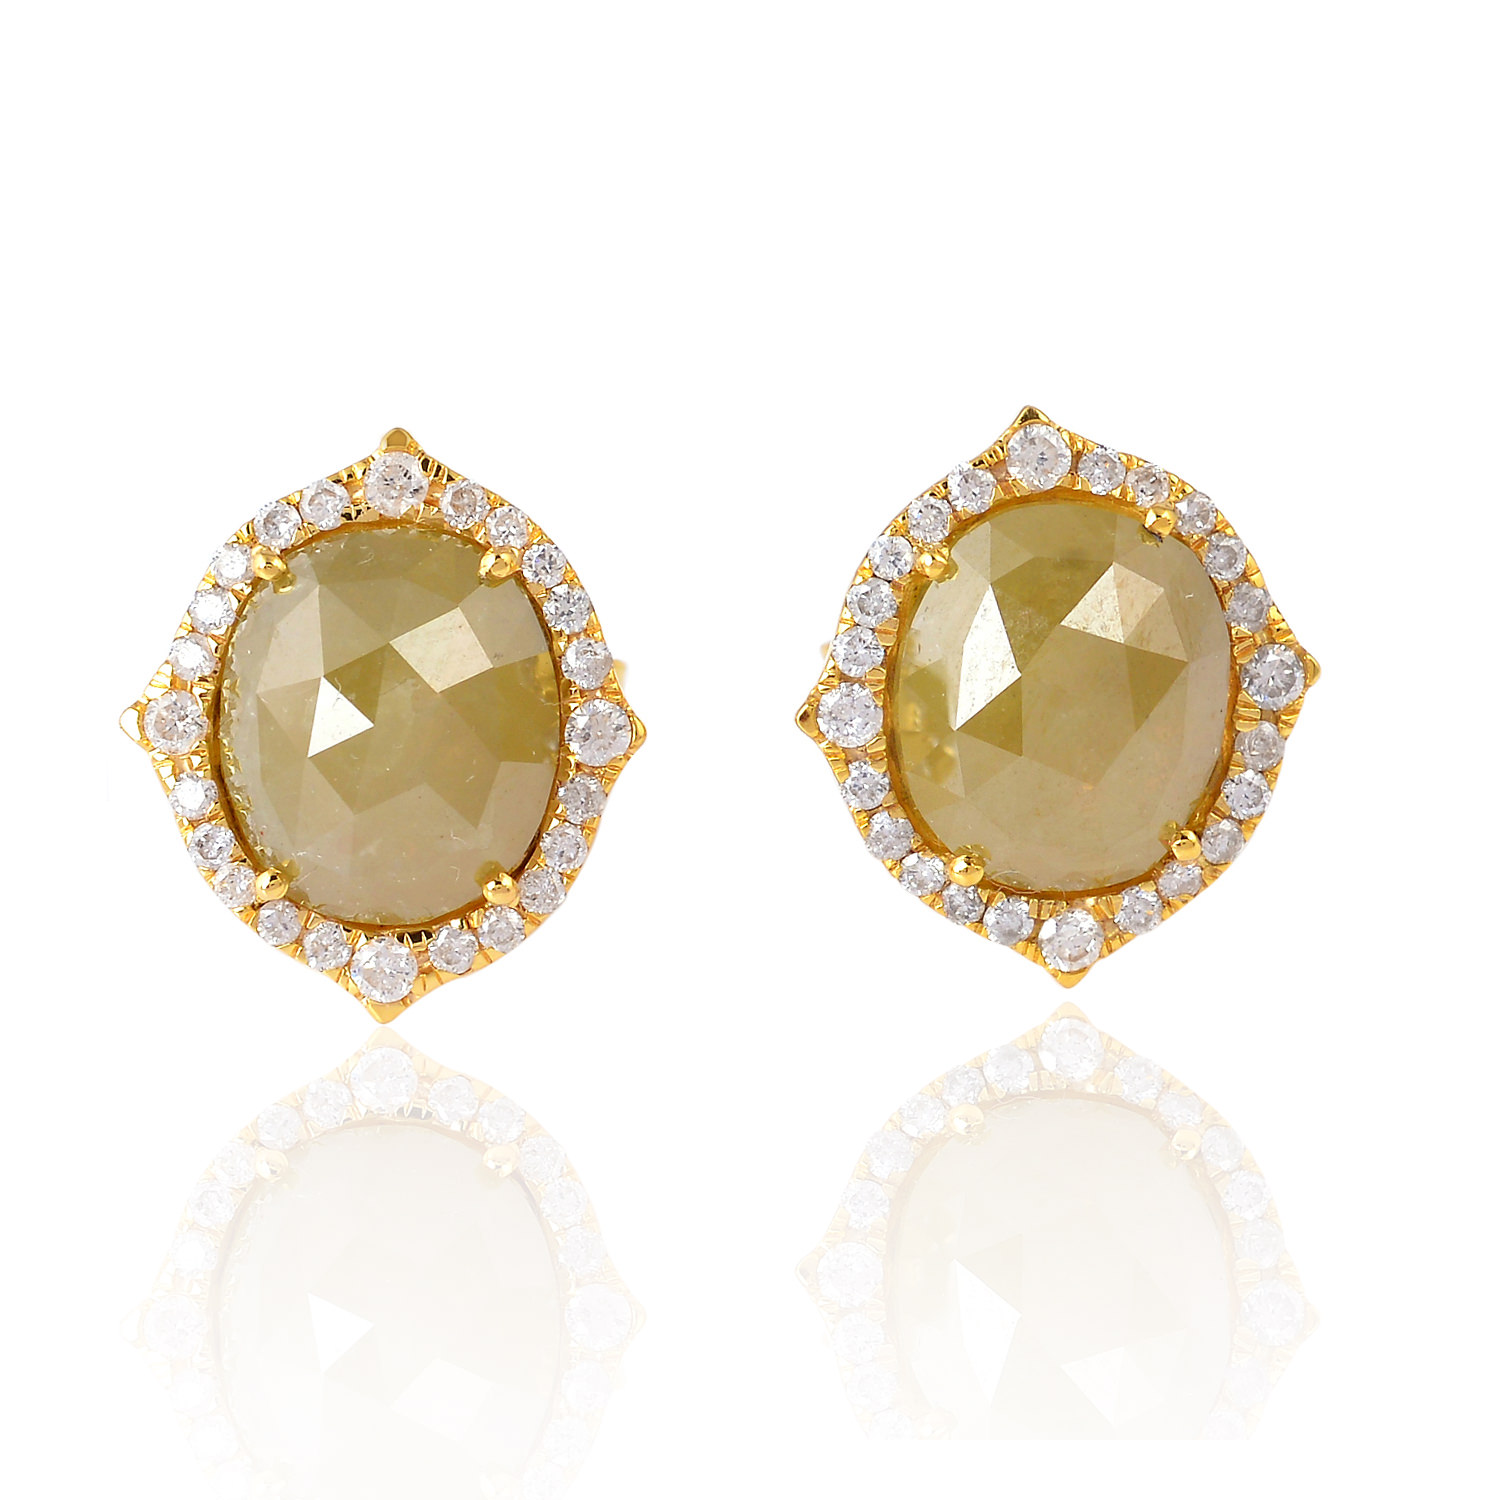 Solid 18k Yellow Gold 4.62ct Natural Ice Diamond Oval Shape Stud Earrings Sale!! | eBay